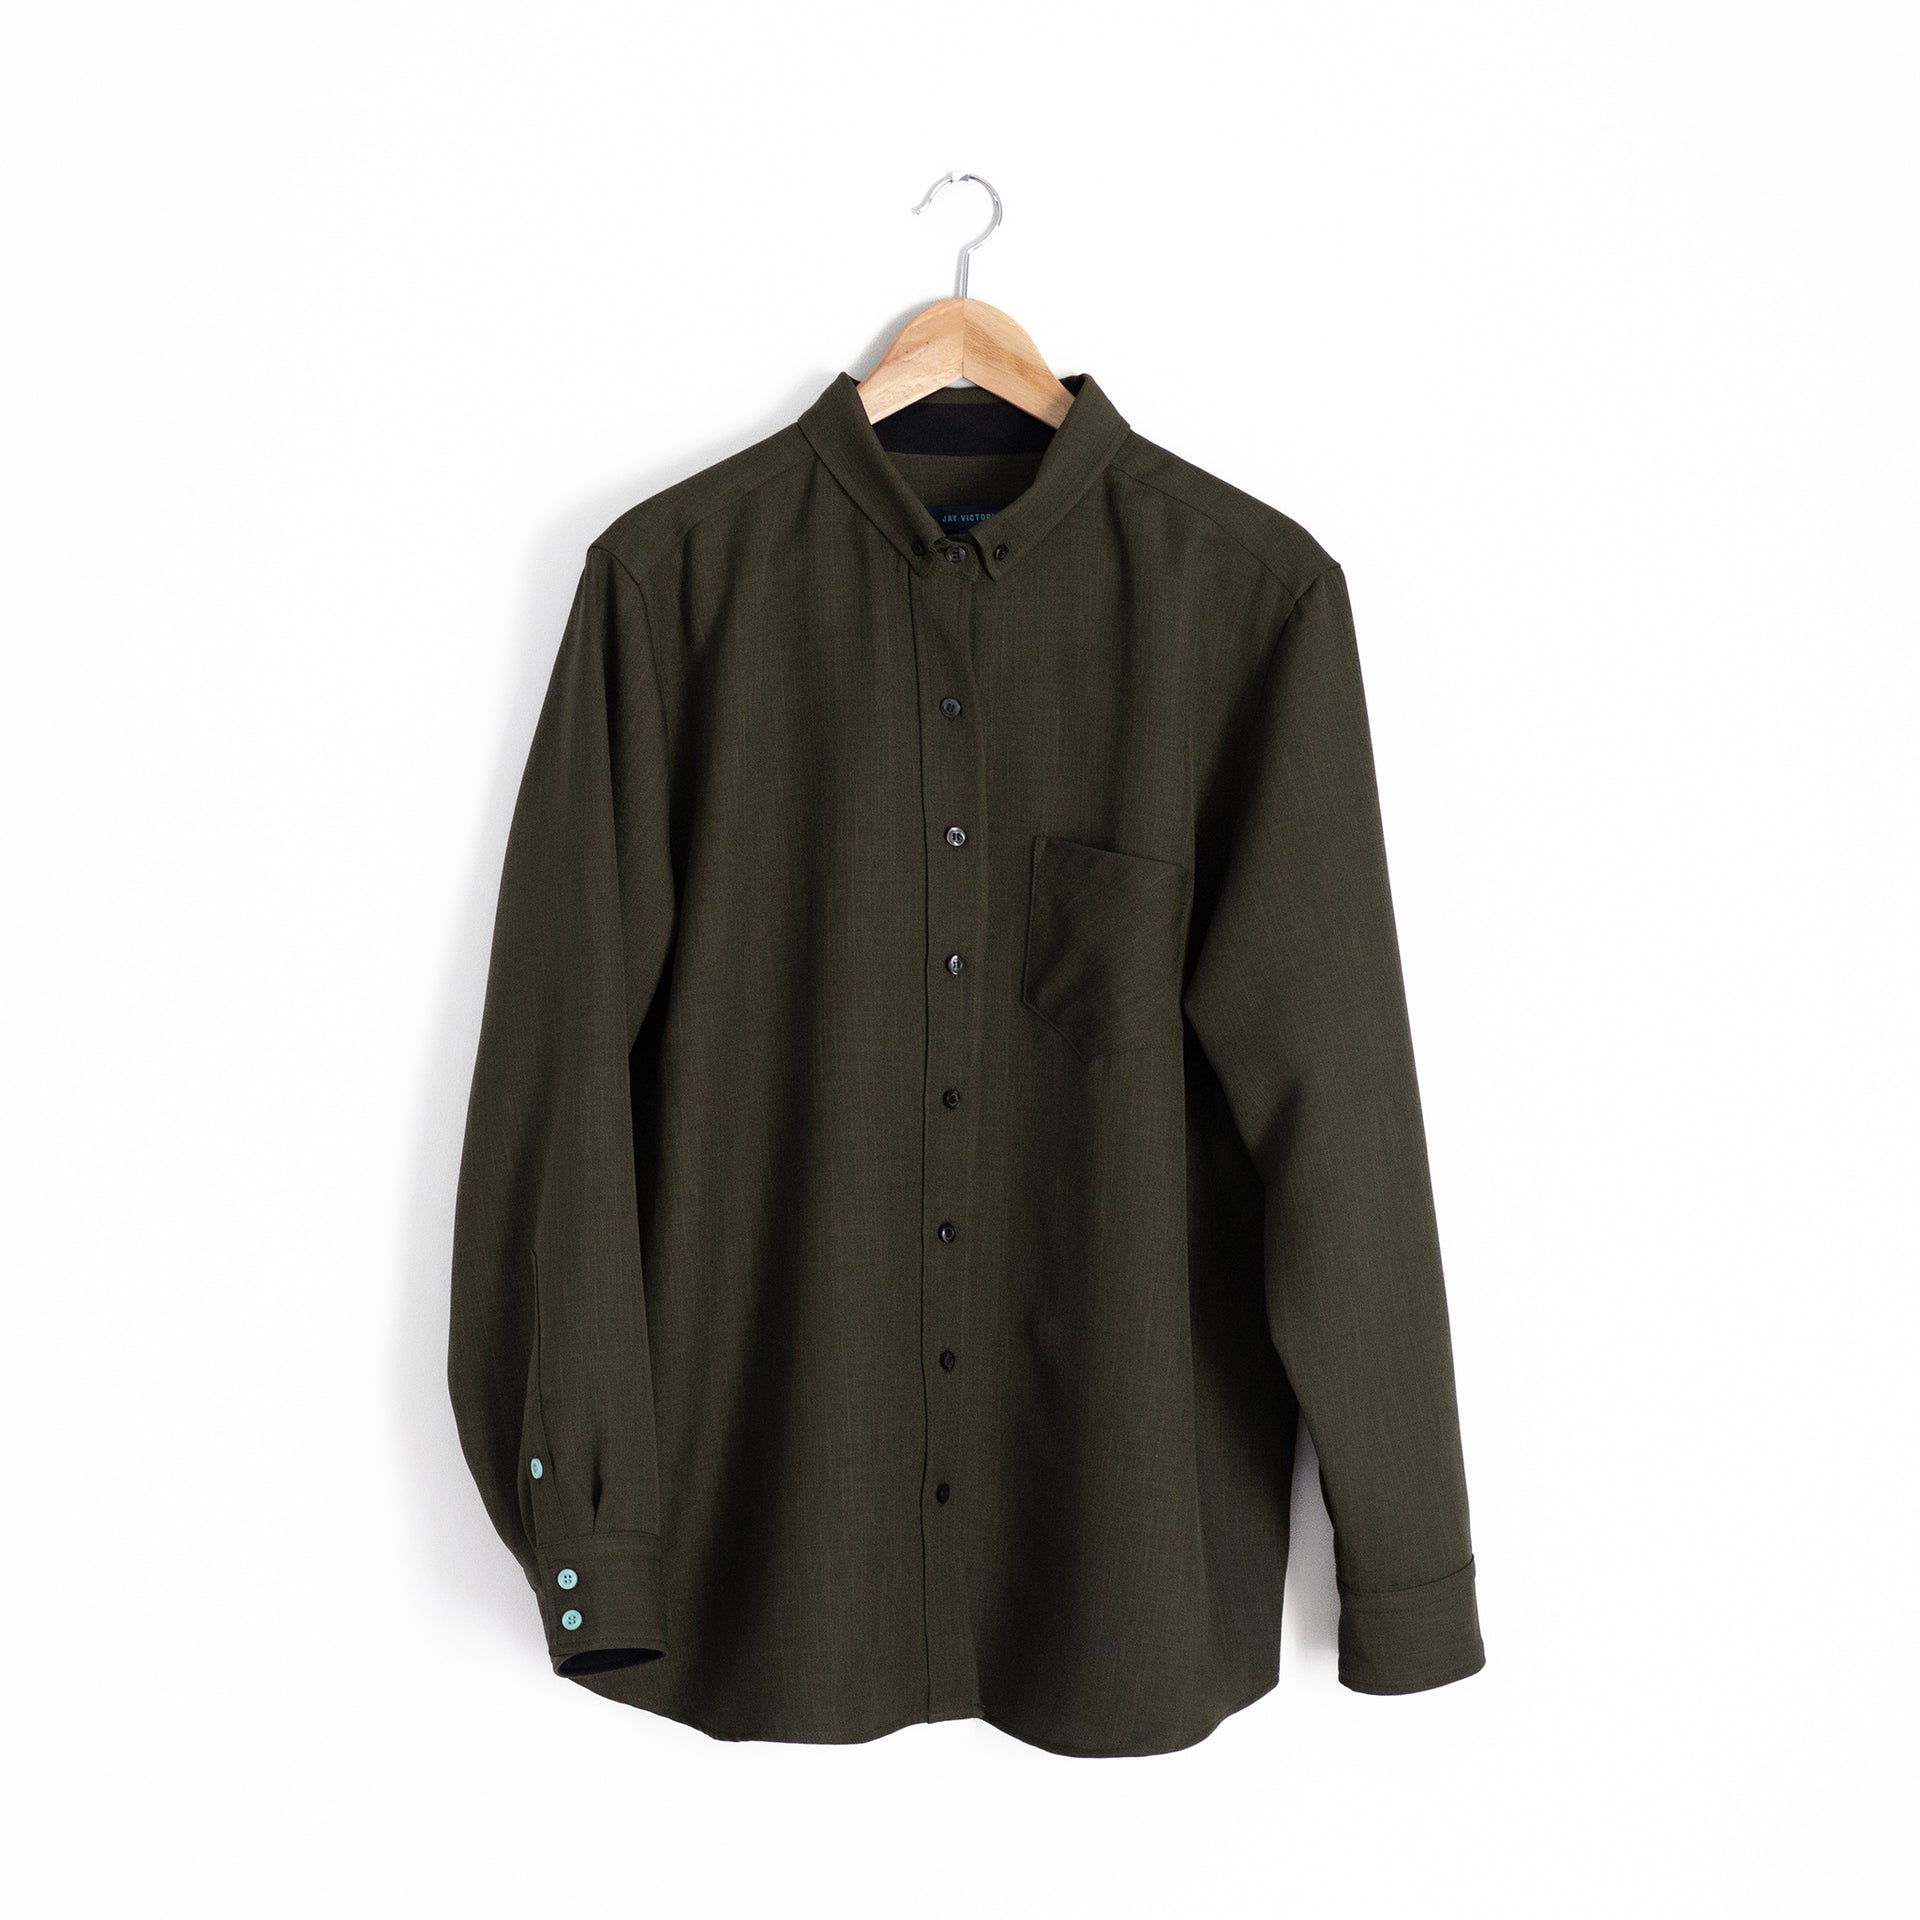 Olive & Oak shirt Green Size XL - $13 (13% Off Retail) - From ivy